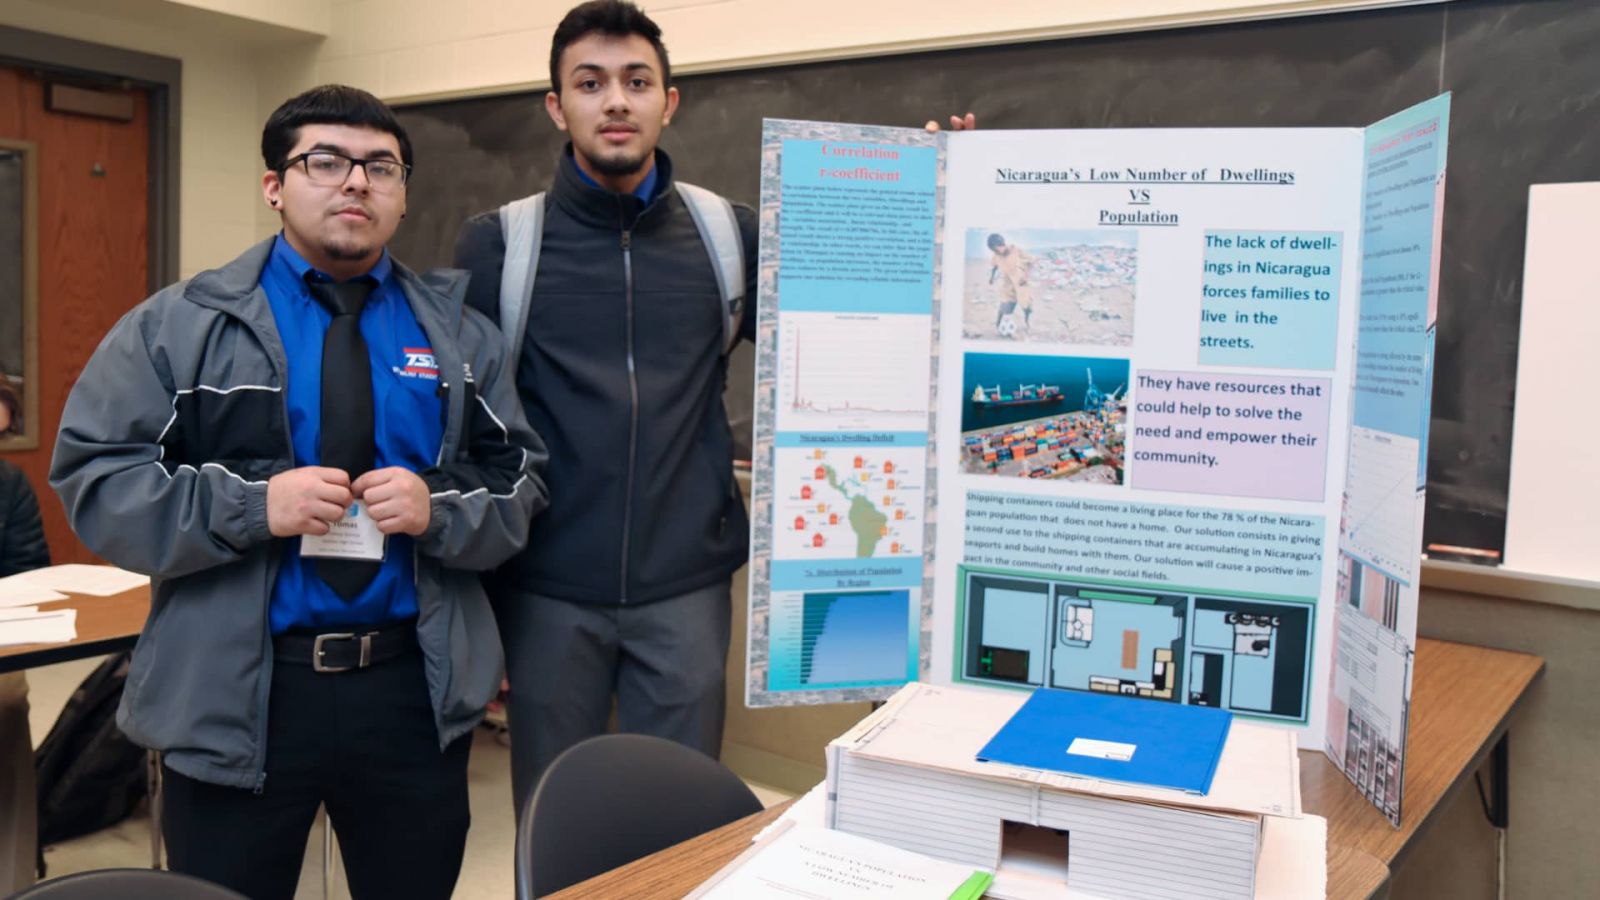 Tomas Santos (left) and Diego González are seniors at Goshen High School in Goshen, Indiana. Their TSA presentation spotlighted the lack of affordable housing in Nicaragua and proposed using excess shipping containers to fill that need.